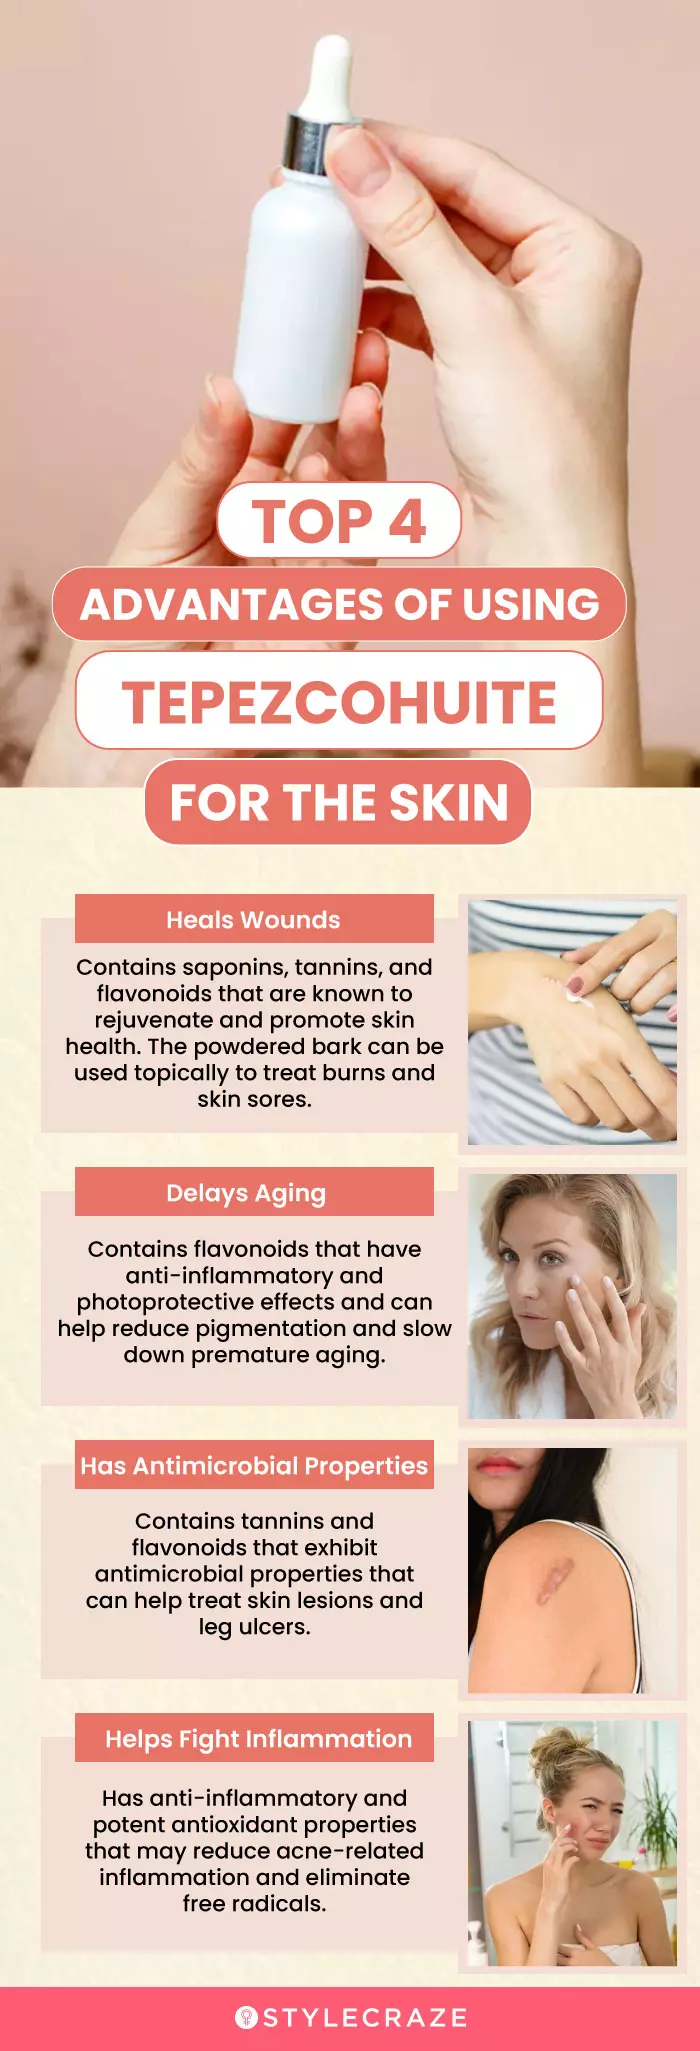 top 4 advantages of using tepezcohuite for skin (infographic)